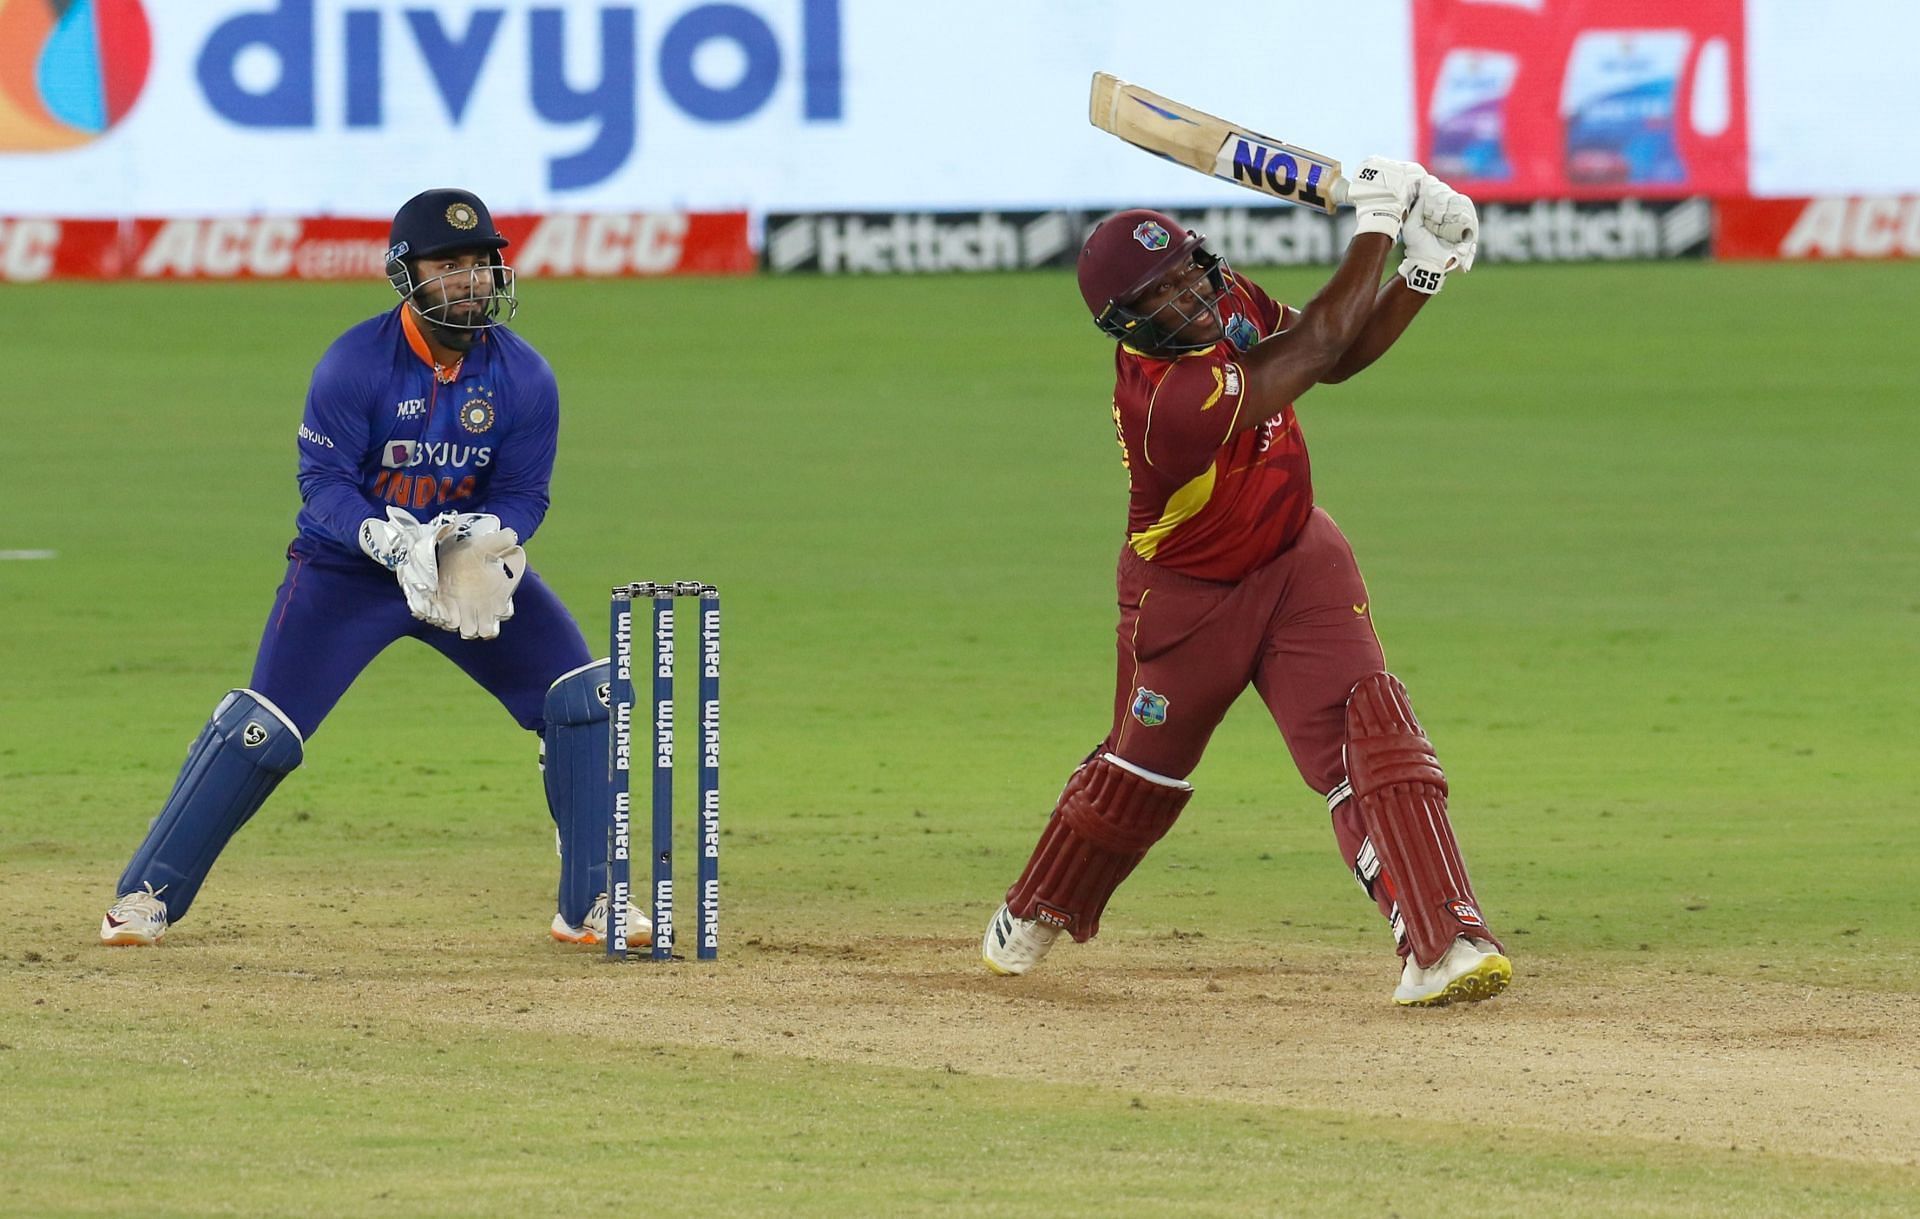 West Indies all-rounder Odean Smith batting against India. Pic: BCCI